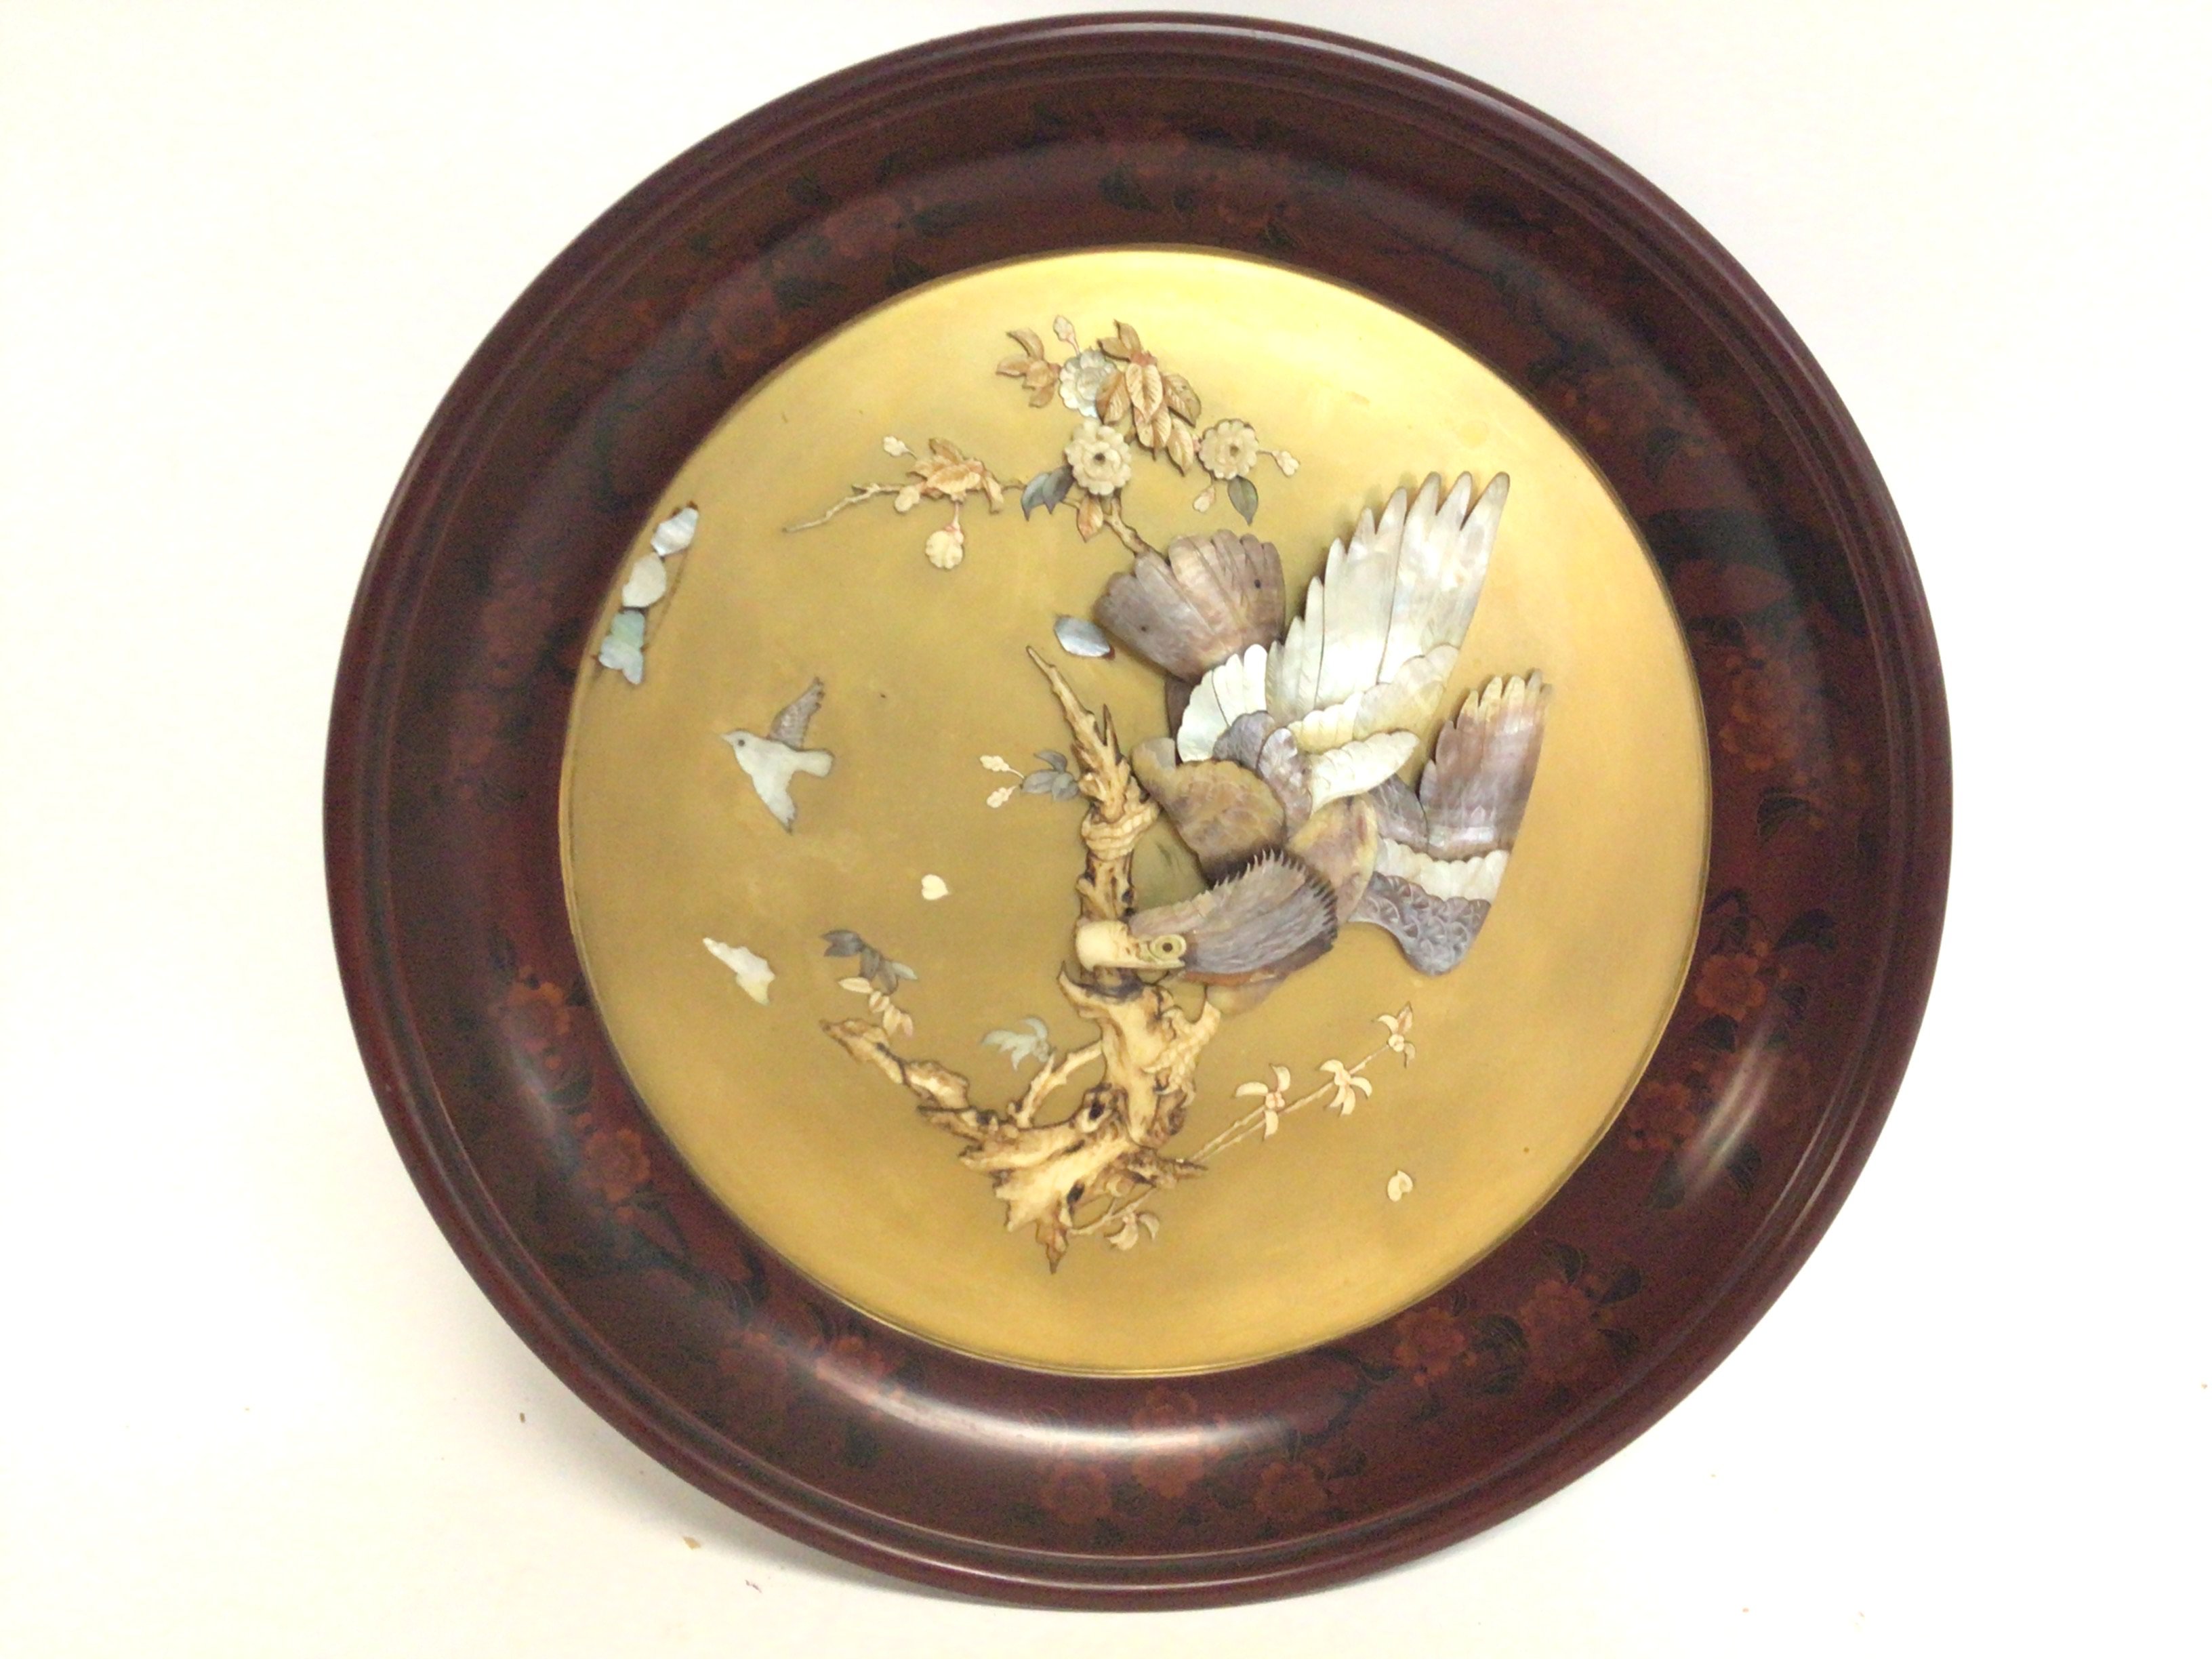 A mother of pearl Japanese eagle shibyama panel in